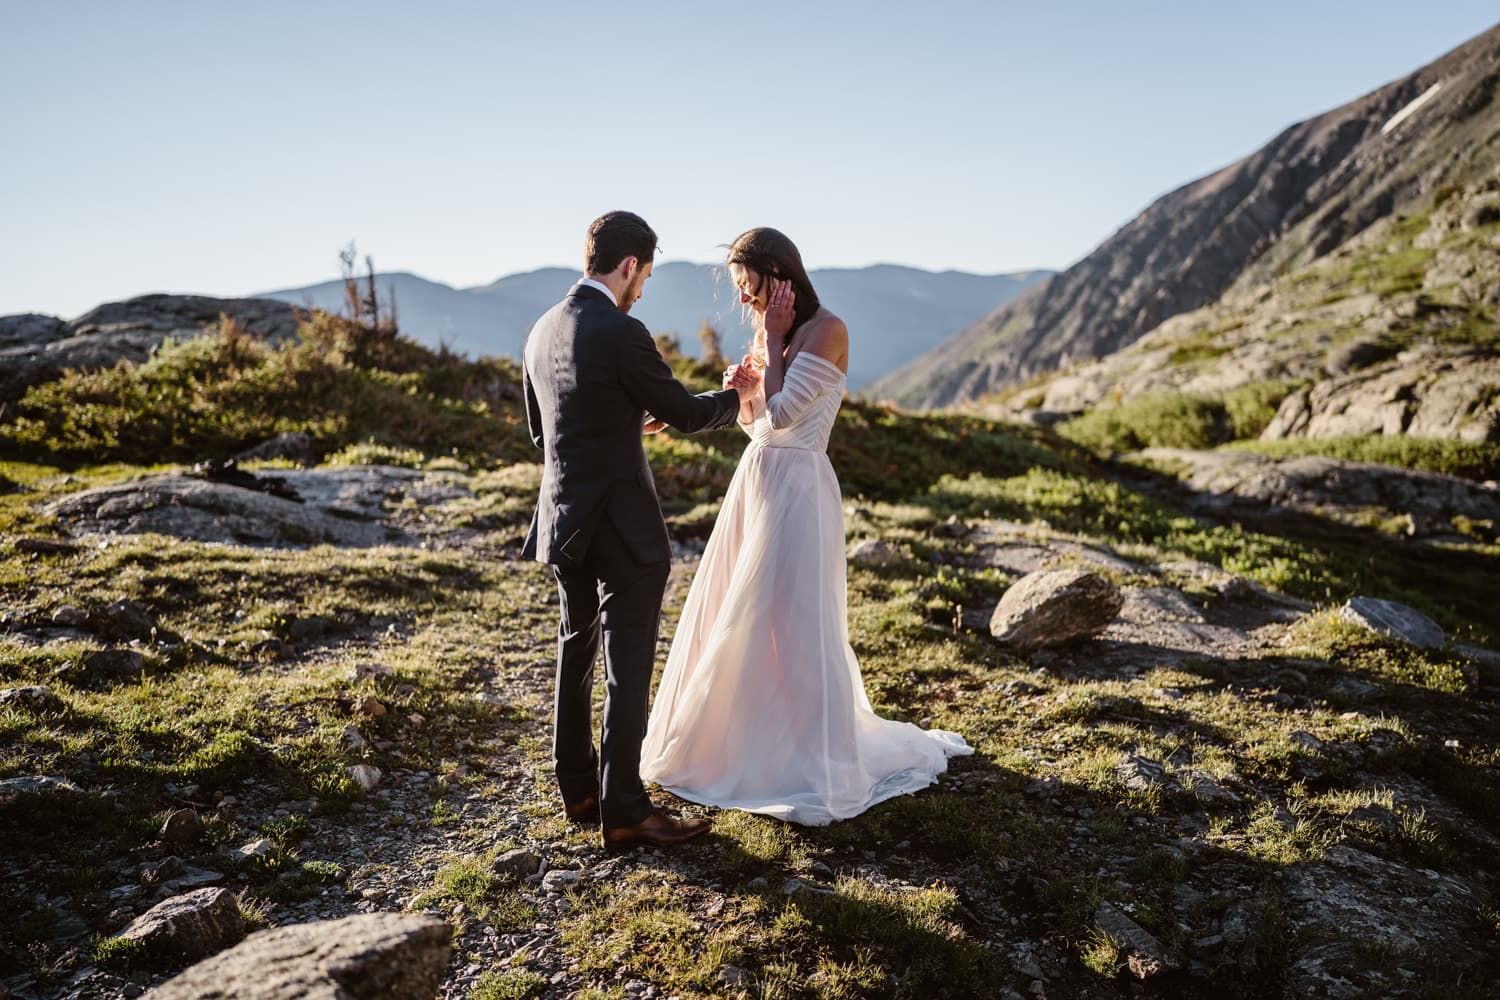 A groom sharing his vows at sunrise in Breckenridge, Colorado.